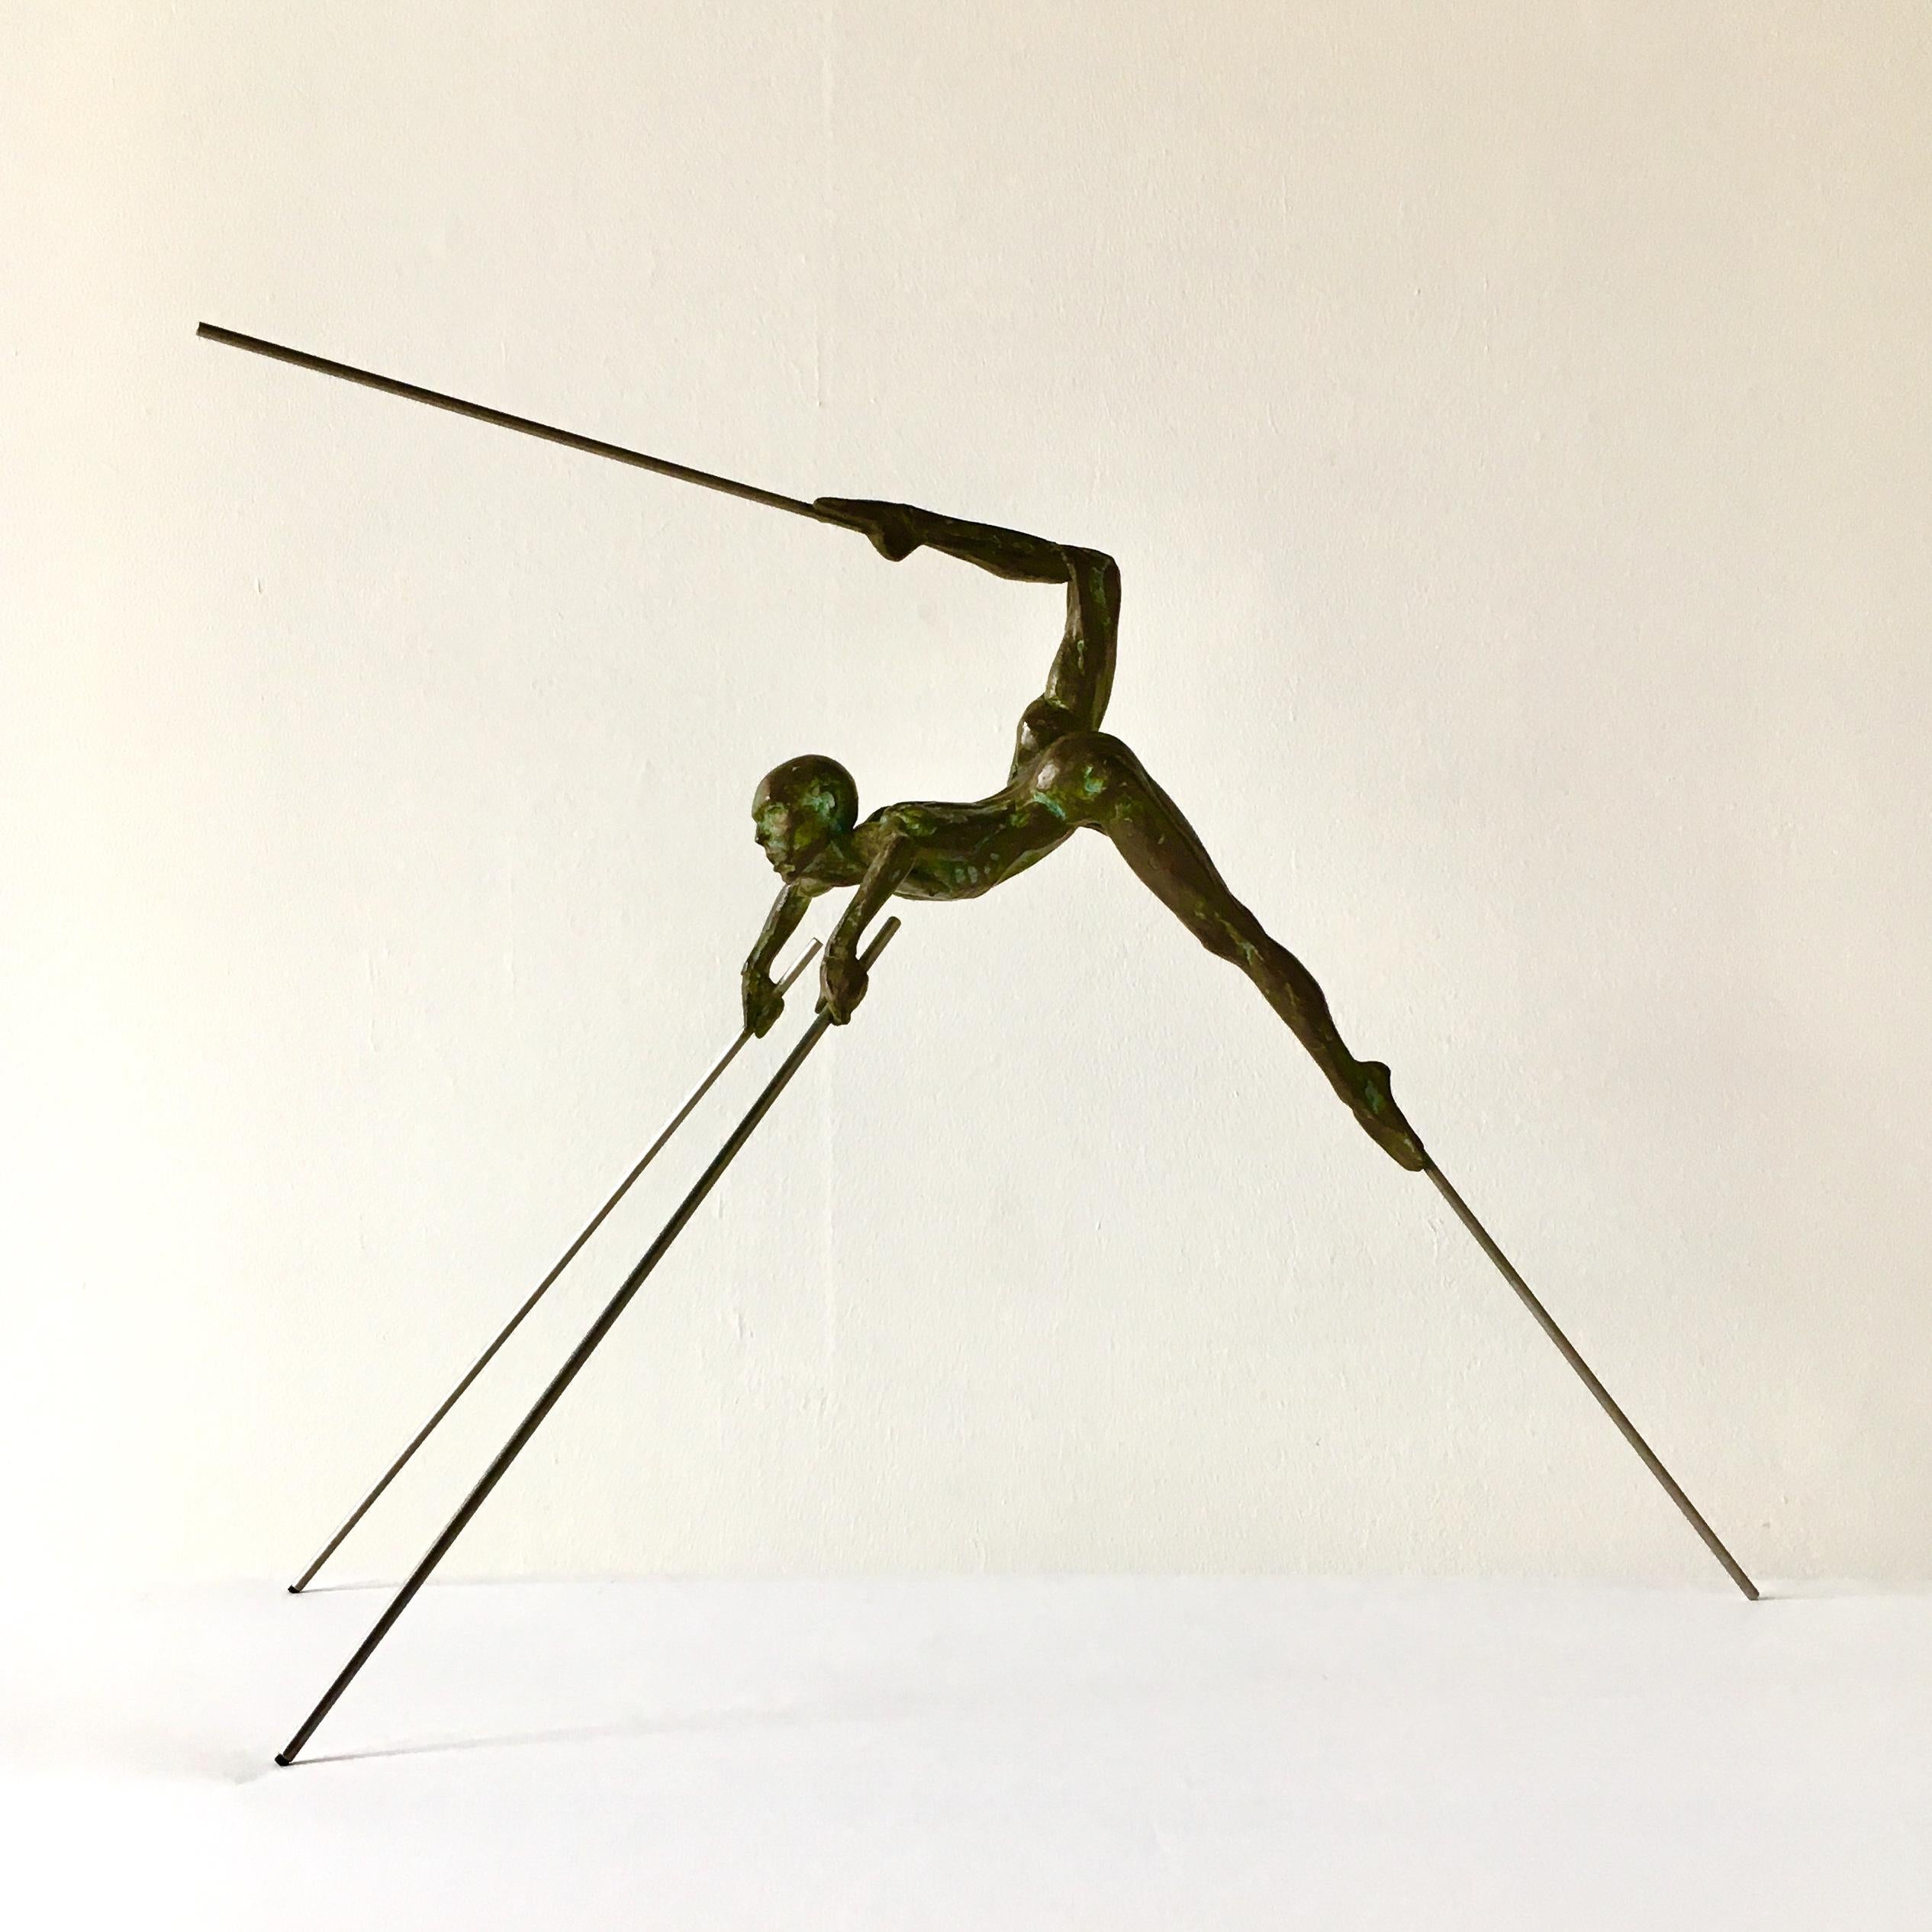 A bronze table sculpture titled 'Petit Scorpion II' by Nicolas Lavarenne, France, 1996 
Signed 2 in edition of 8.